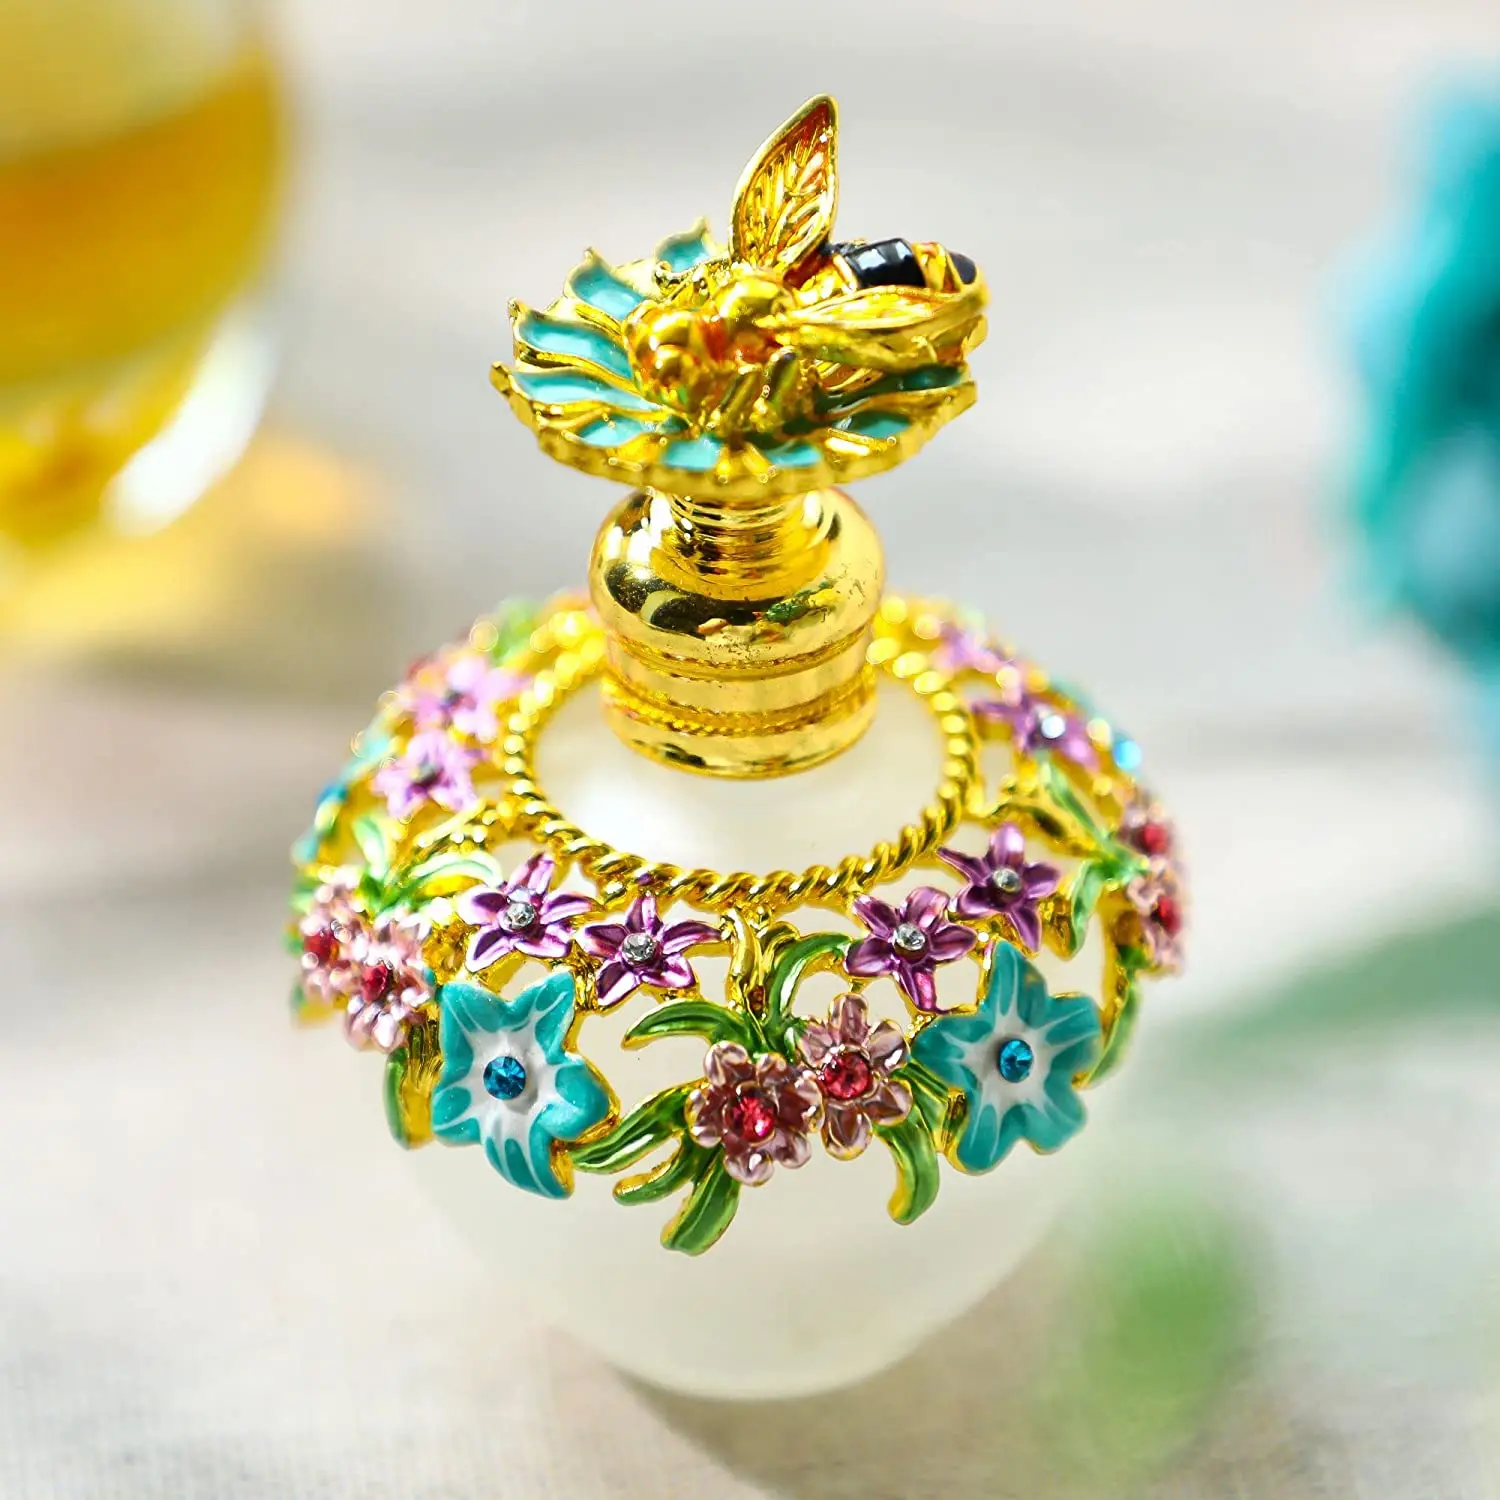 H&D Fancy Glass Perfume Bottle Empty with Flowers Bee Charm Decorative Vintage Crystal Perfume Decanter(Golden,40ML) hot fashion teacher gift gift super mistress keychain 25mm glass dome cabochon charm thanks mistress jewlery keychain jewelry